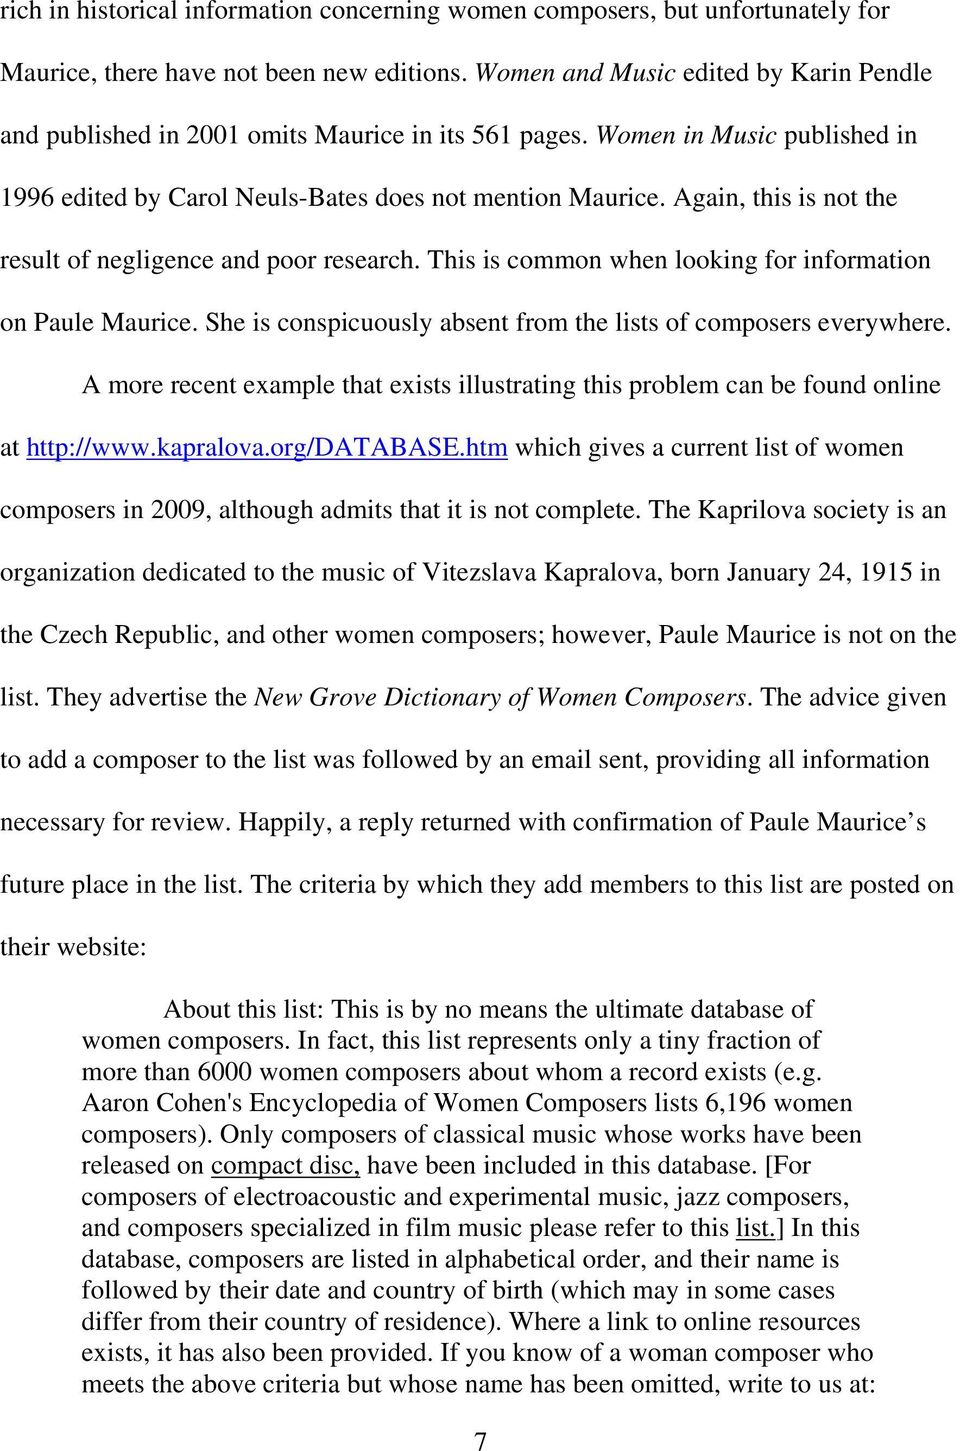 Again, this is not the result of negligence and poor research. This is common when looking for information on Paule Maurice. She is conspicuously absent from the lists of composers everywhere.